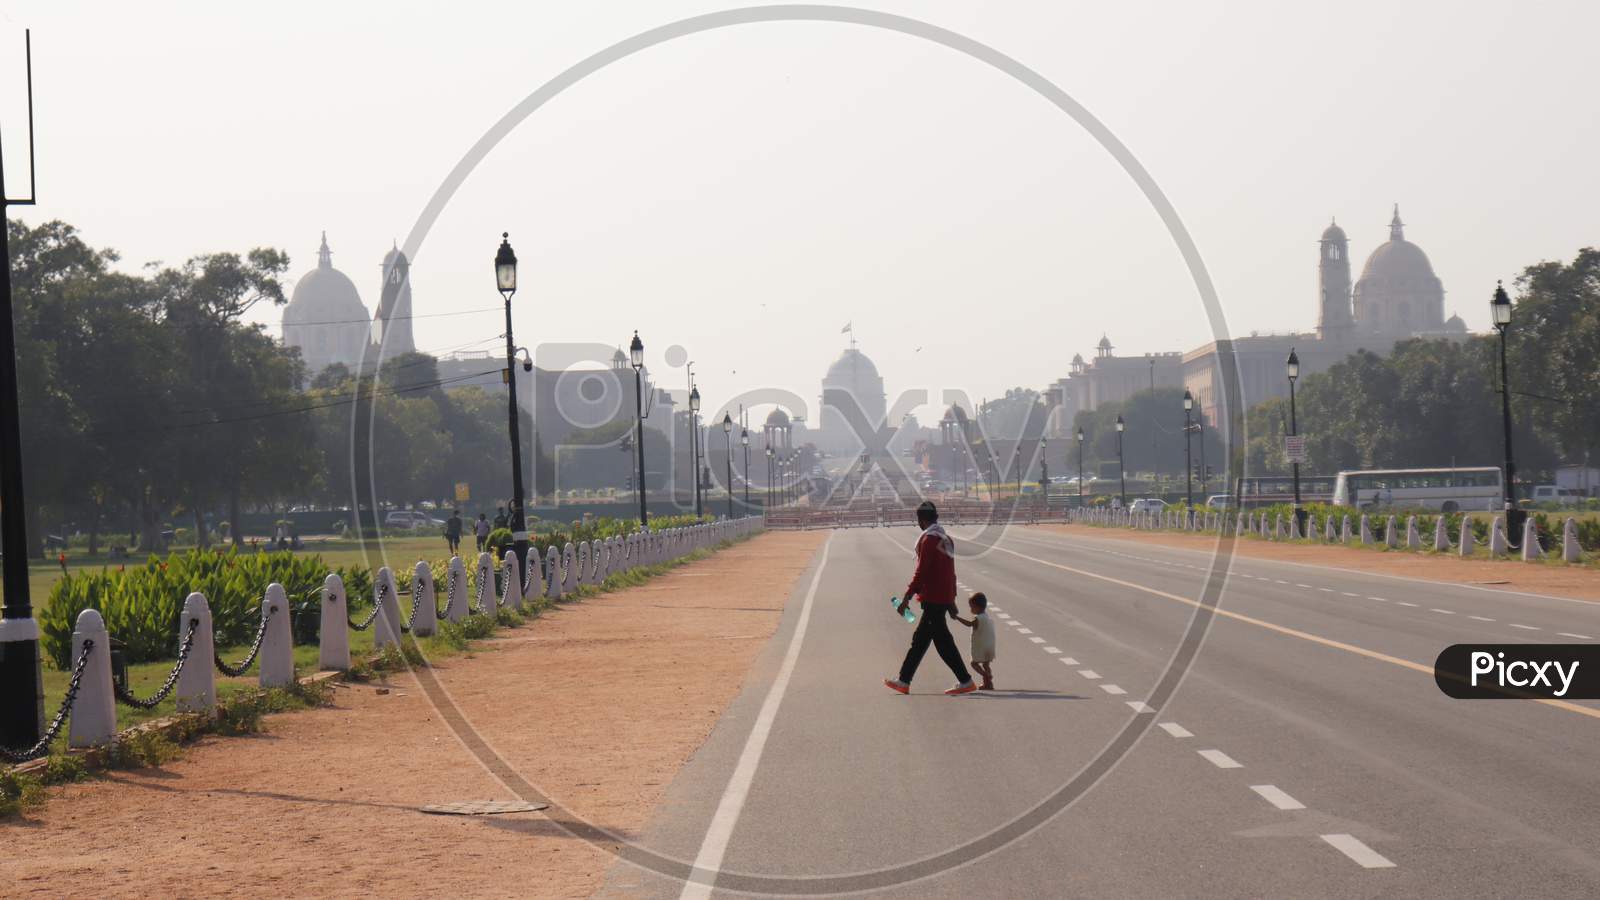 FATHER AND SON CROSSING ROAD IN FRONT OF RASHTRAPATI BHAVAN DELHI, INDIA OCTOBER 2ND 2020